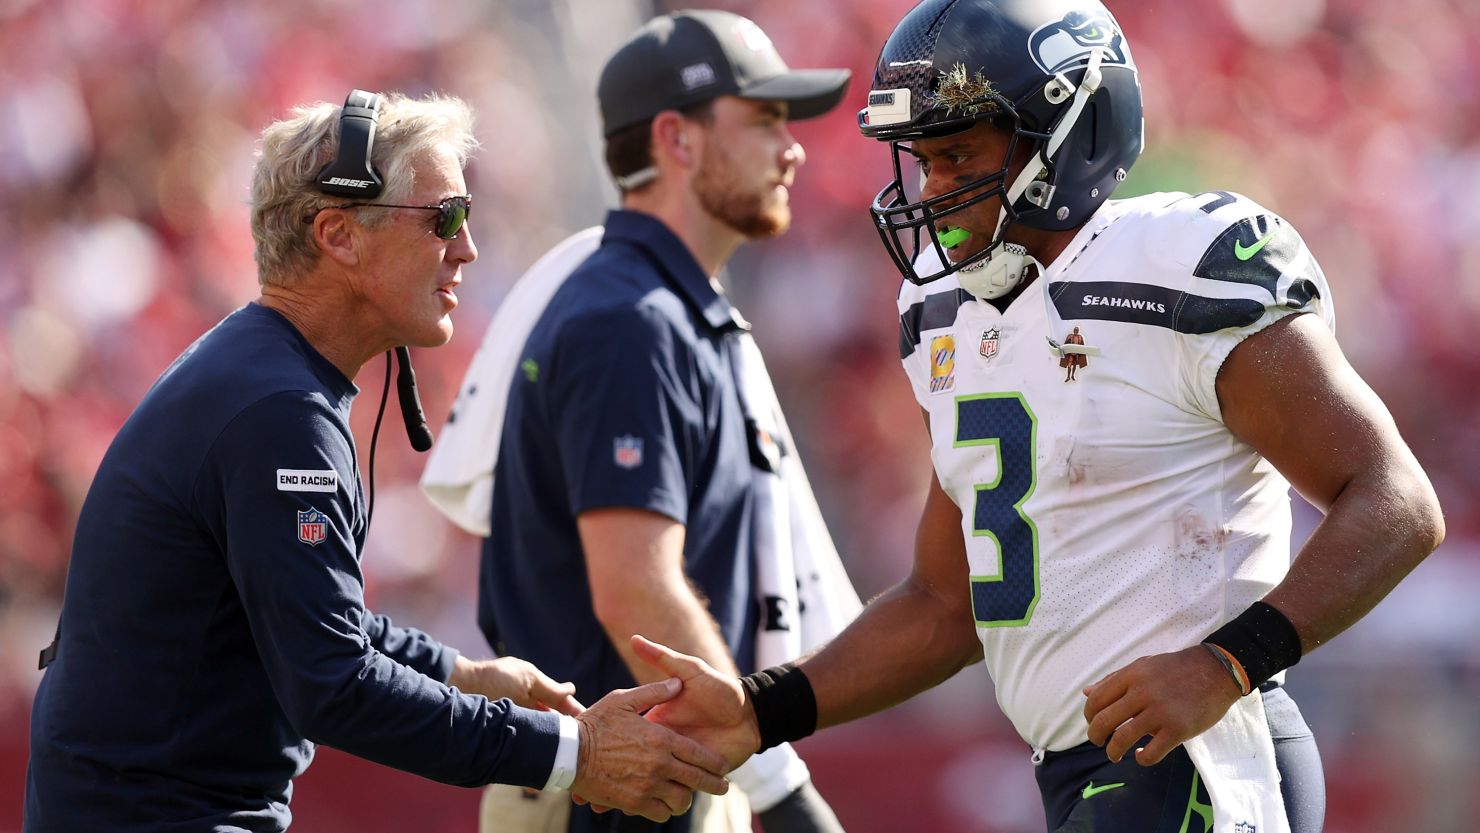 Russell Wilson celebrates with head coach Pete Carroll after a touchdown during the third quarter against the San Francisco 49ers at Levi's Stadium.